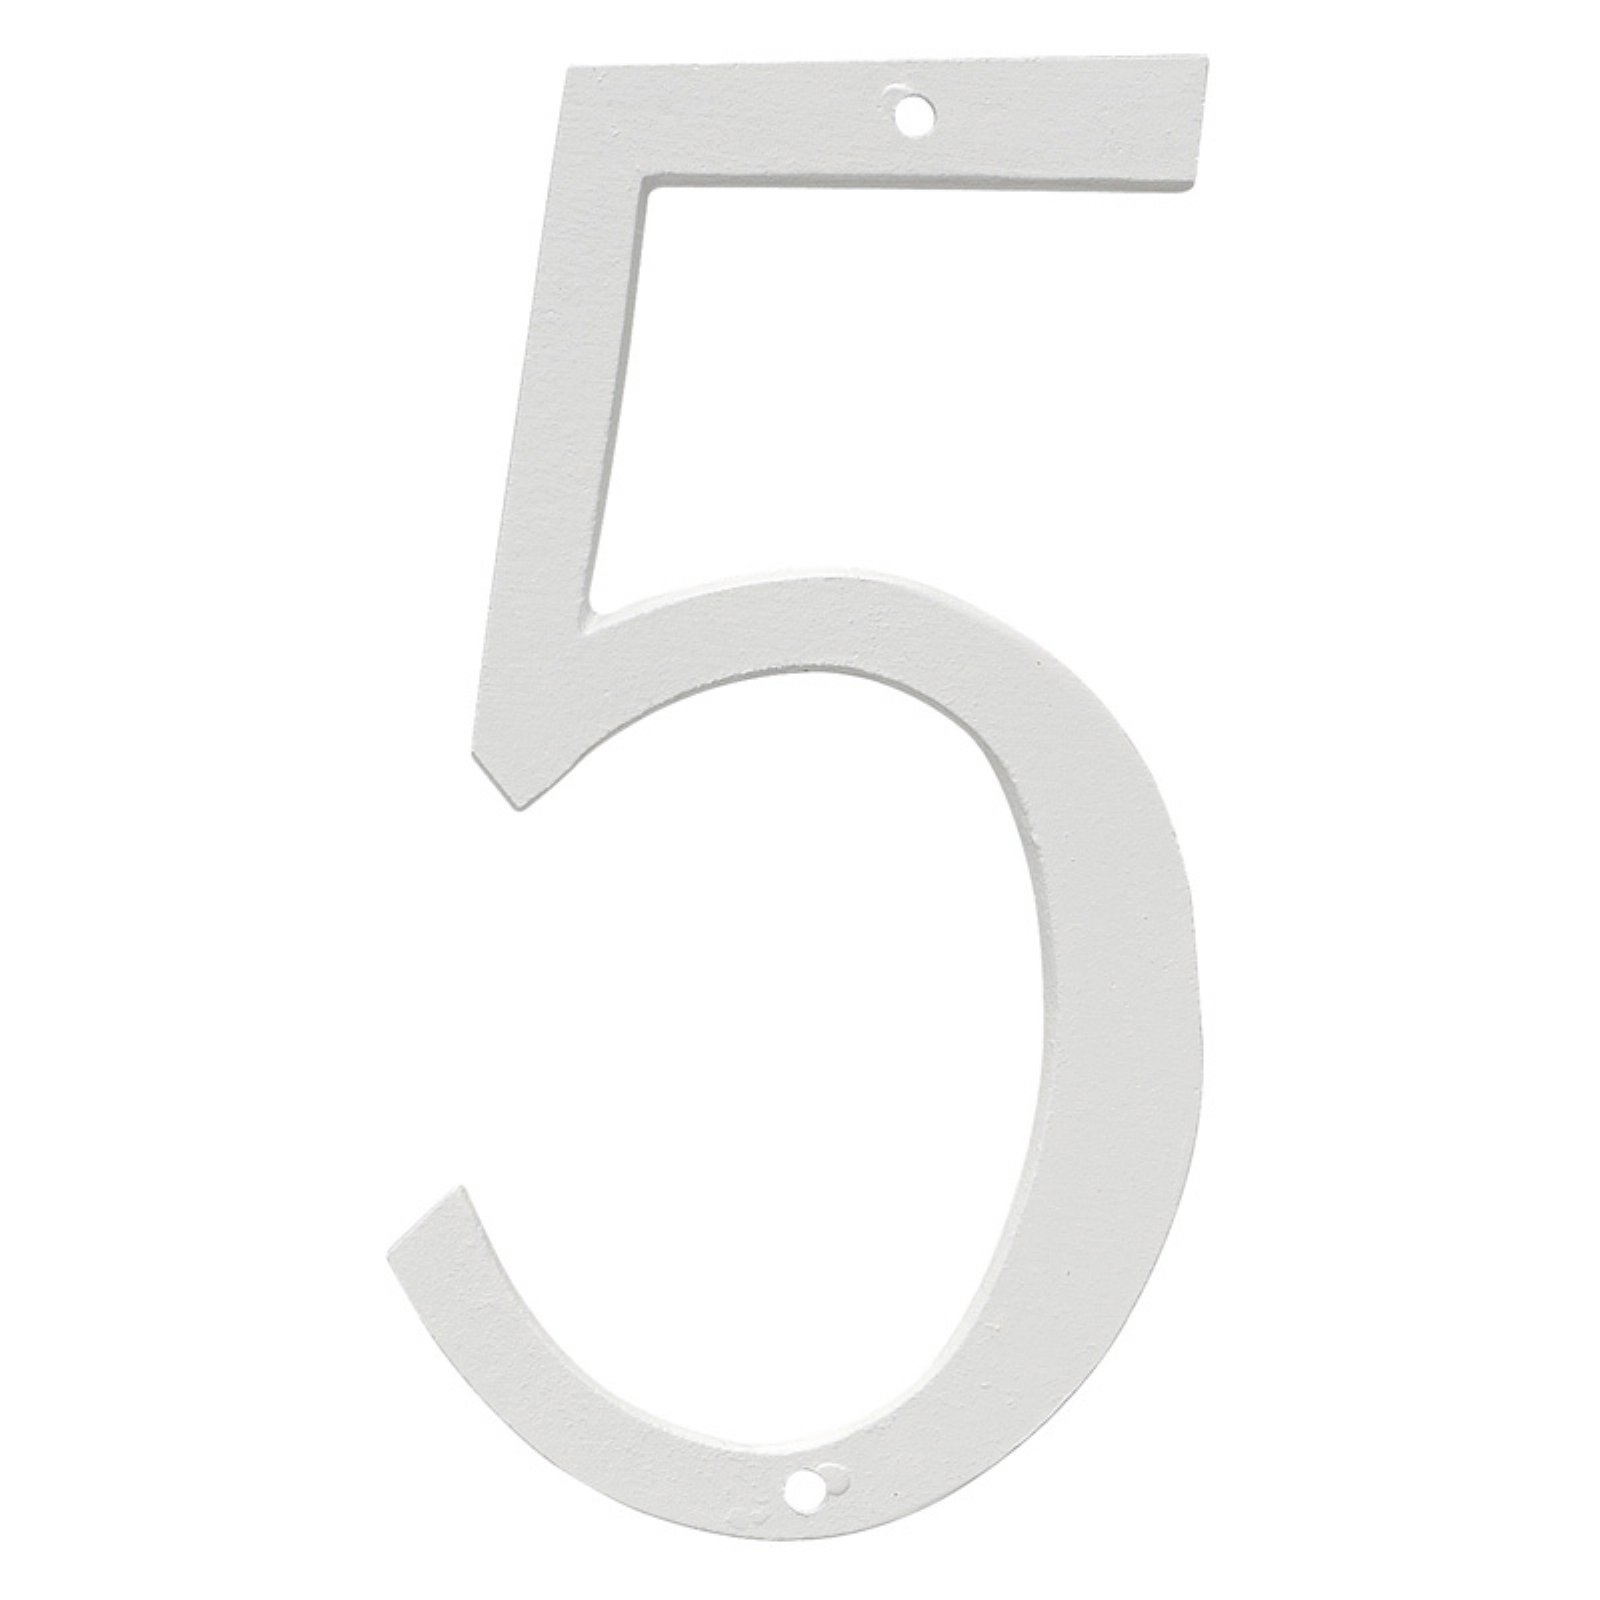 Montague Metal Products CSHN-1-4 4 In. Standard Modern Font Individual House Number 1 - image 5 of 11